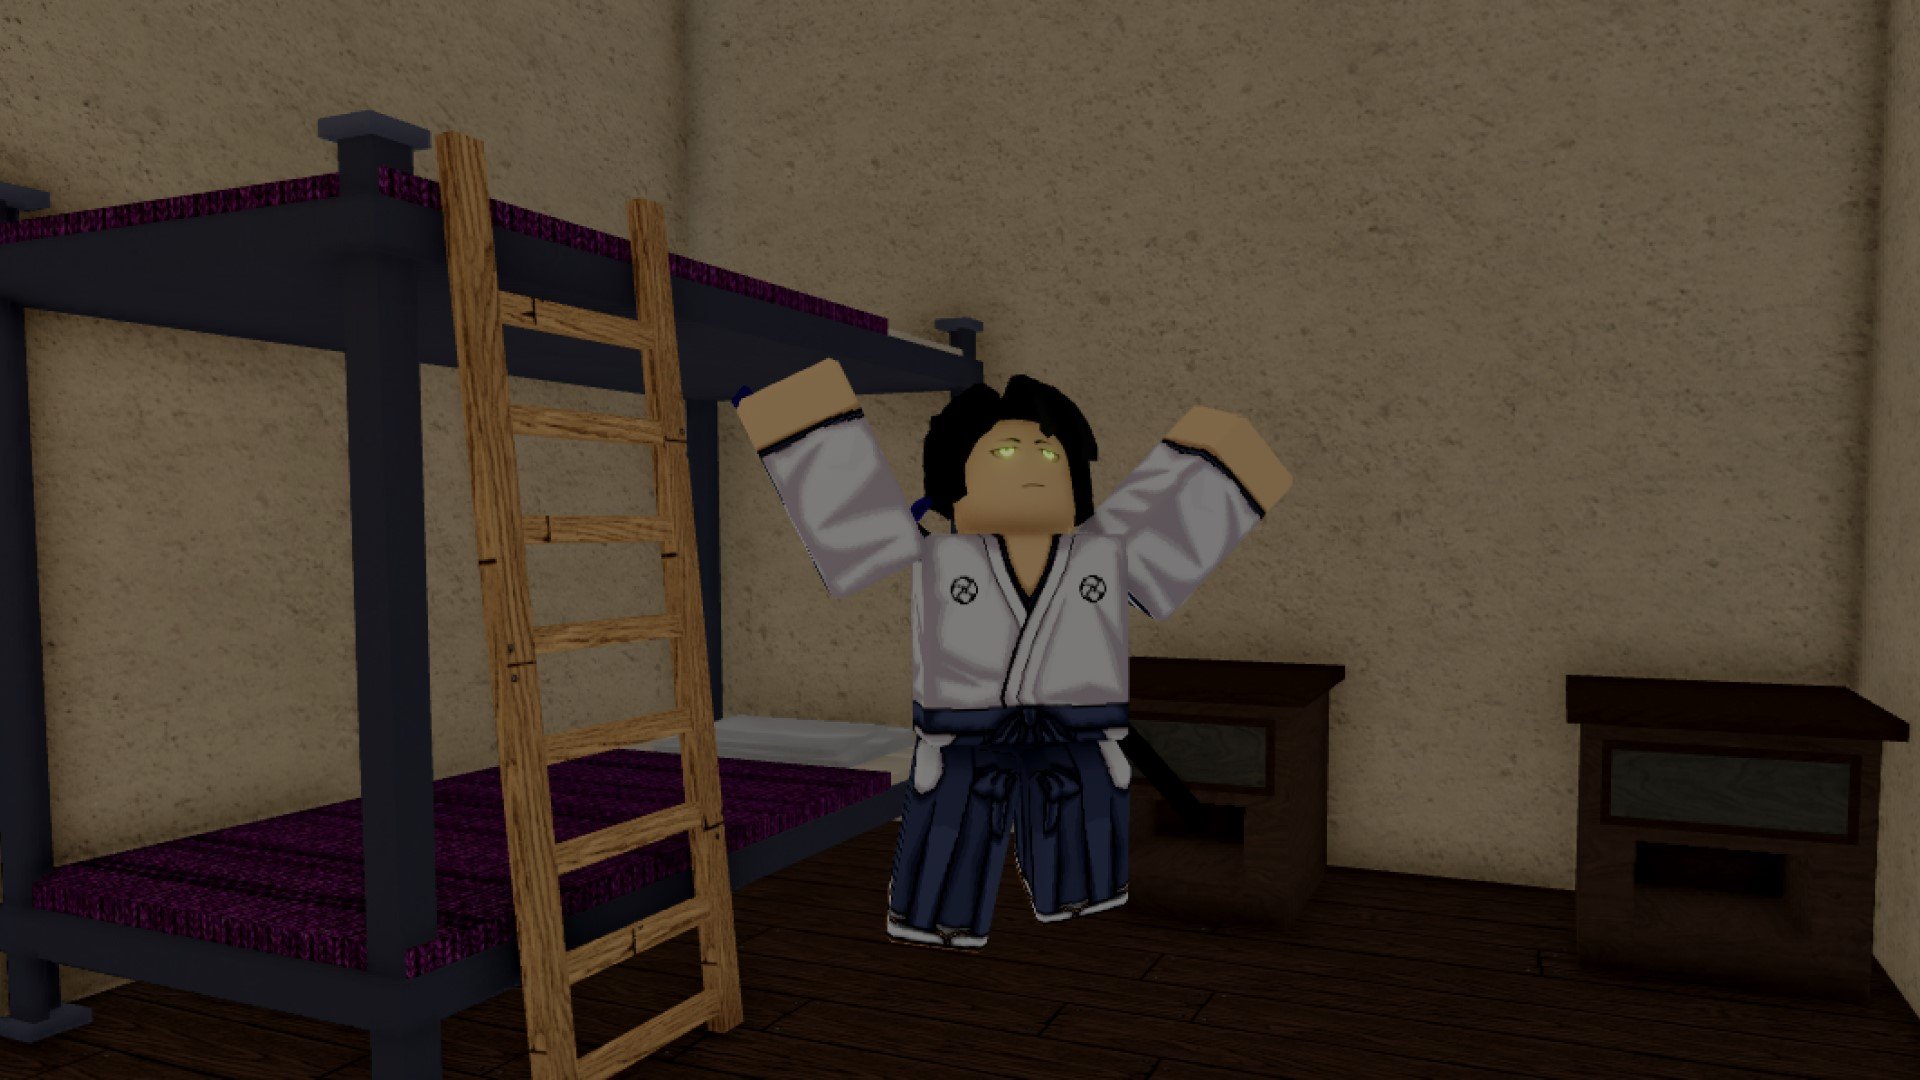 A character from Roblox game Type Soul performing the 'Cheer' Emote in front of a set of bunk beds.